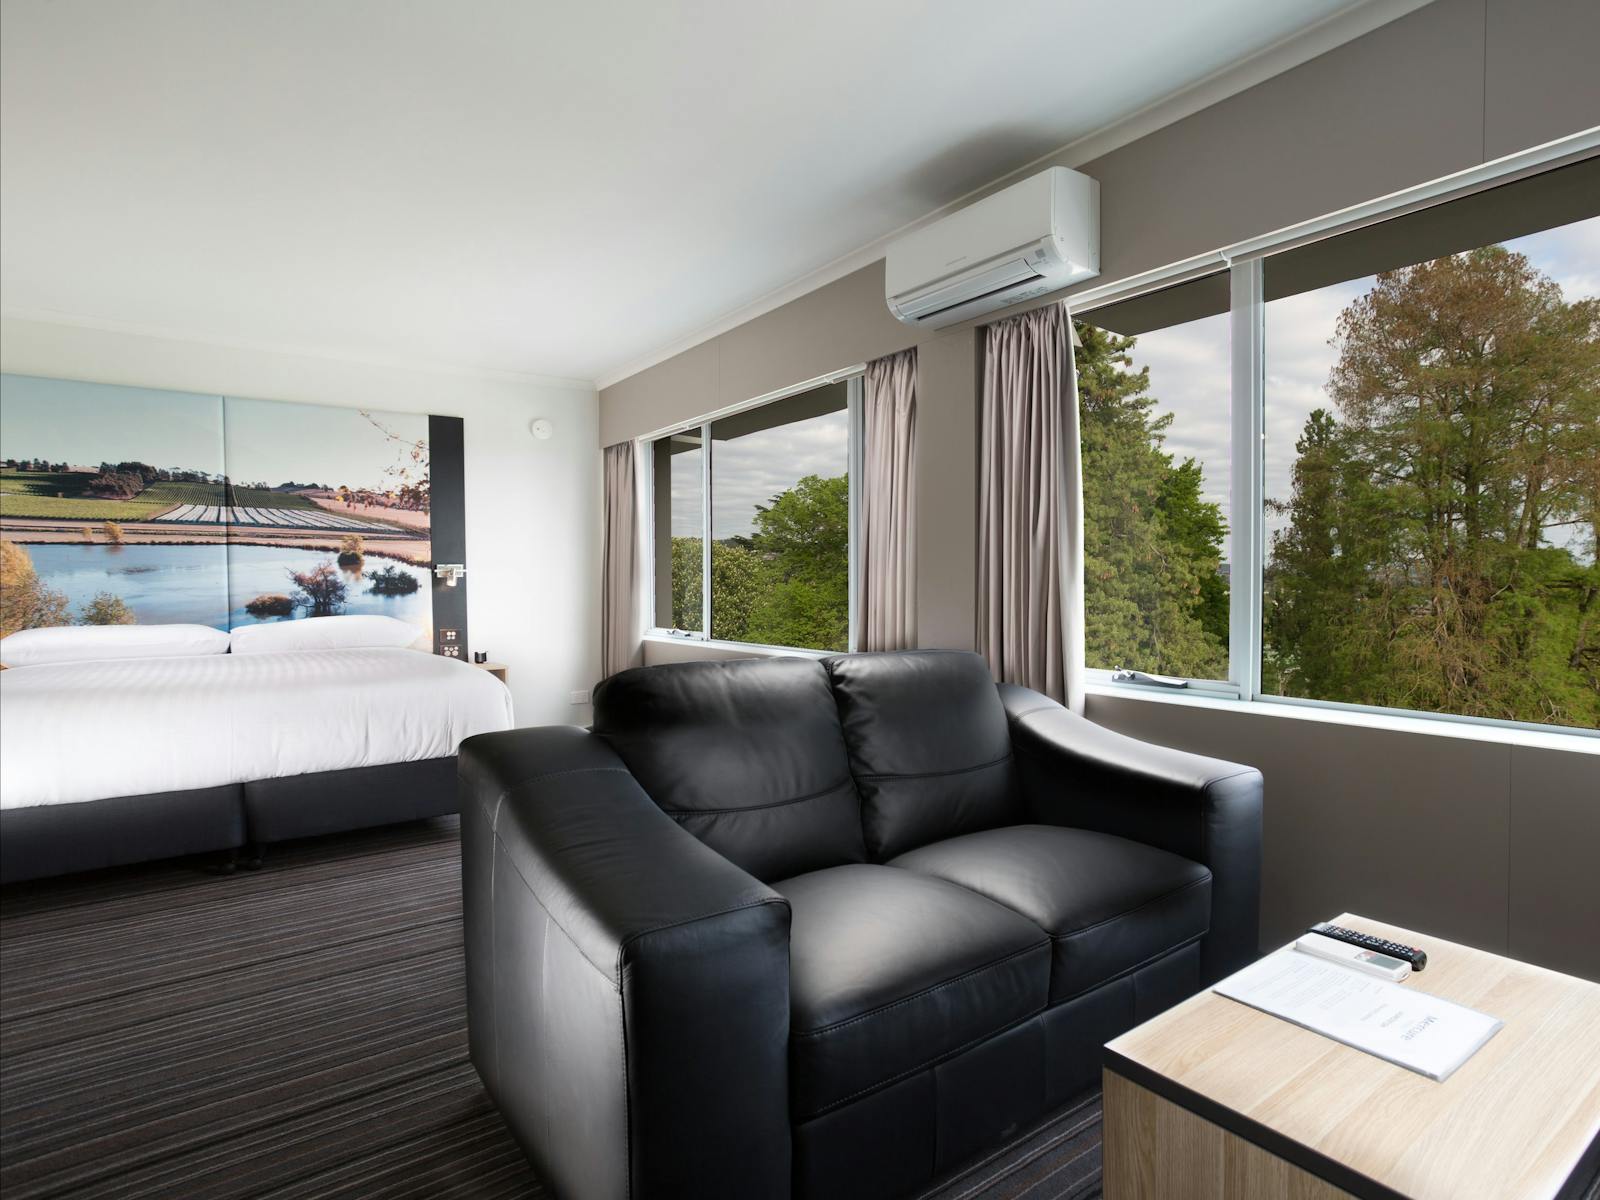 Guest accommodation room, with lounge suite and king bed, two large windows with sky/trees view.